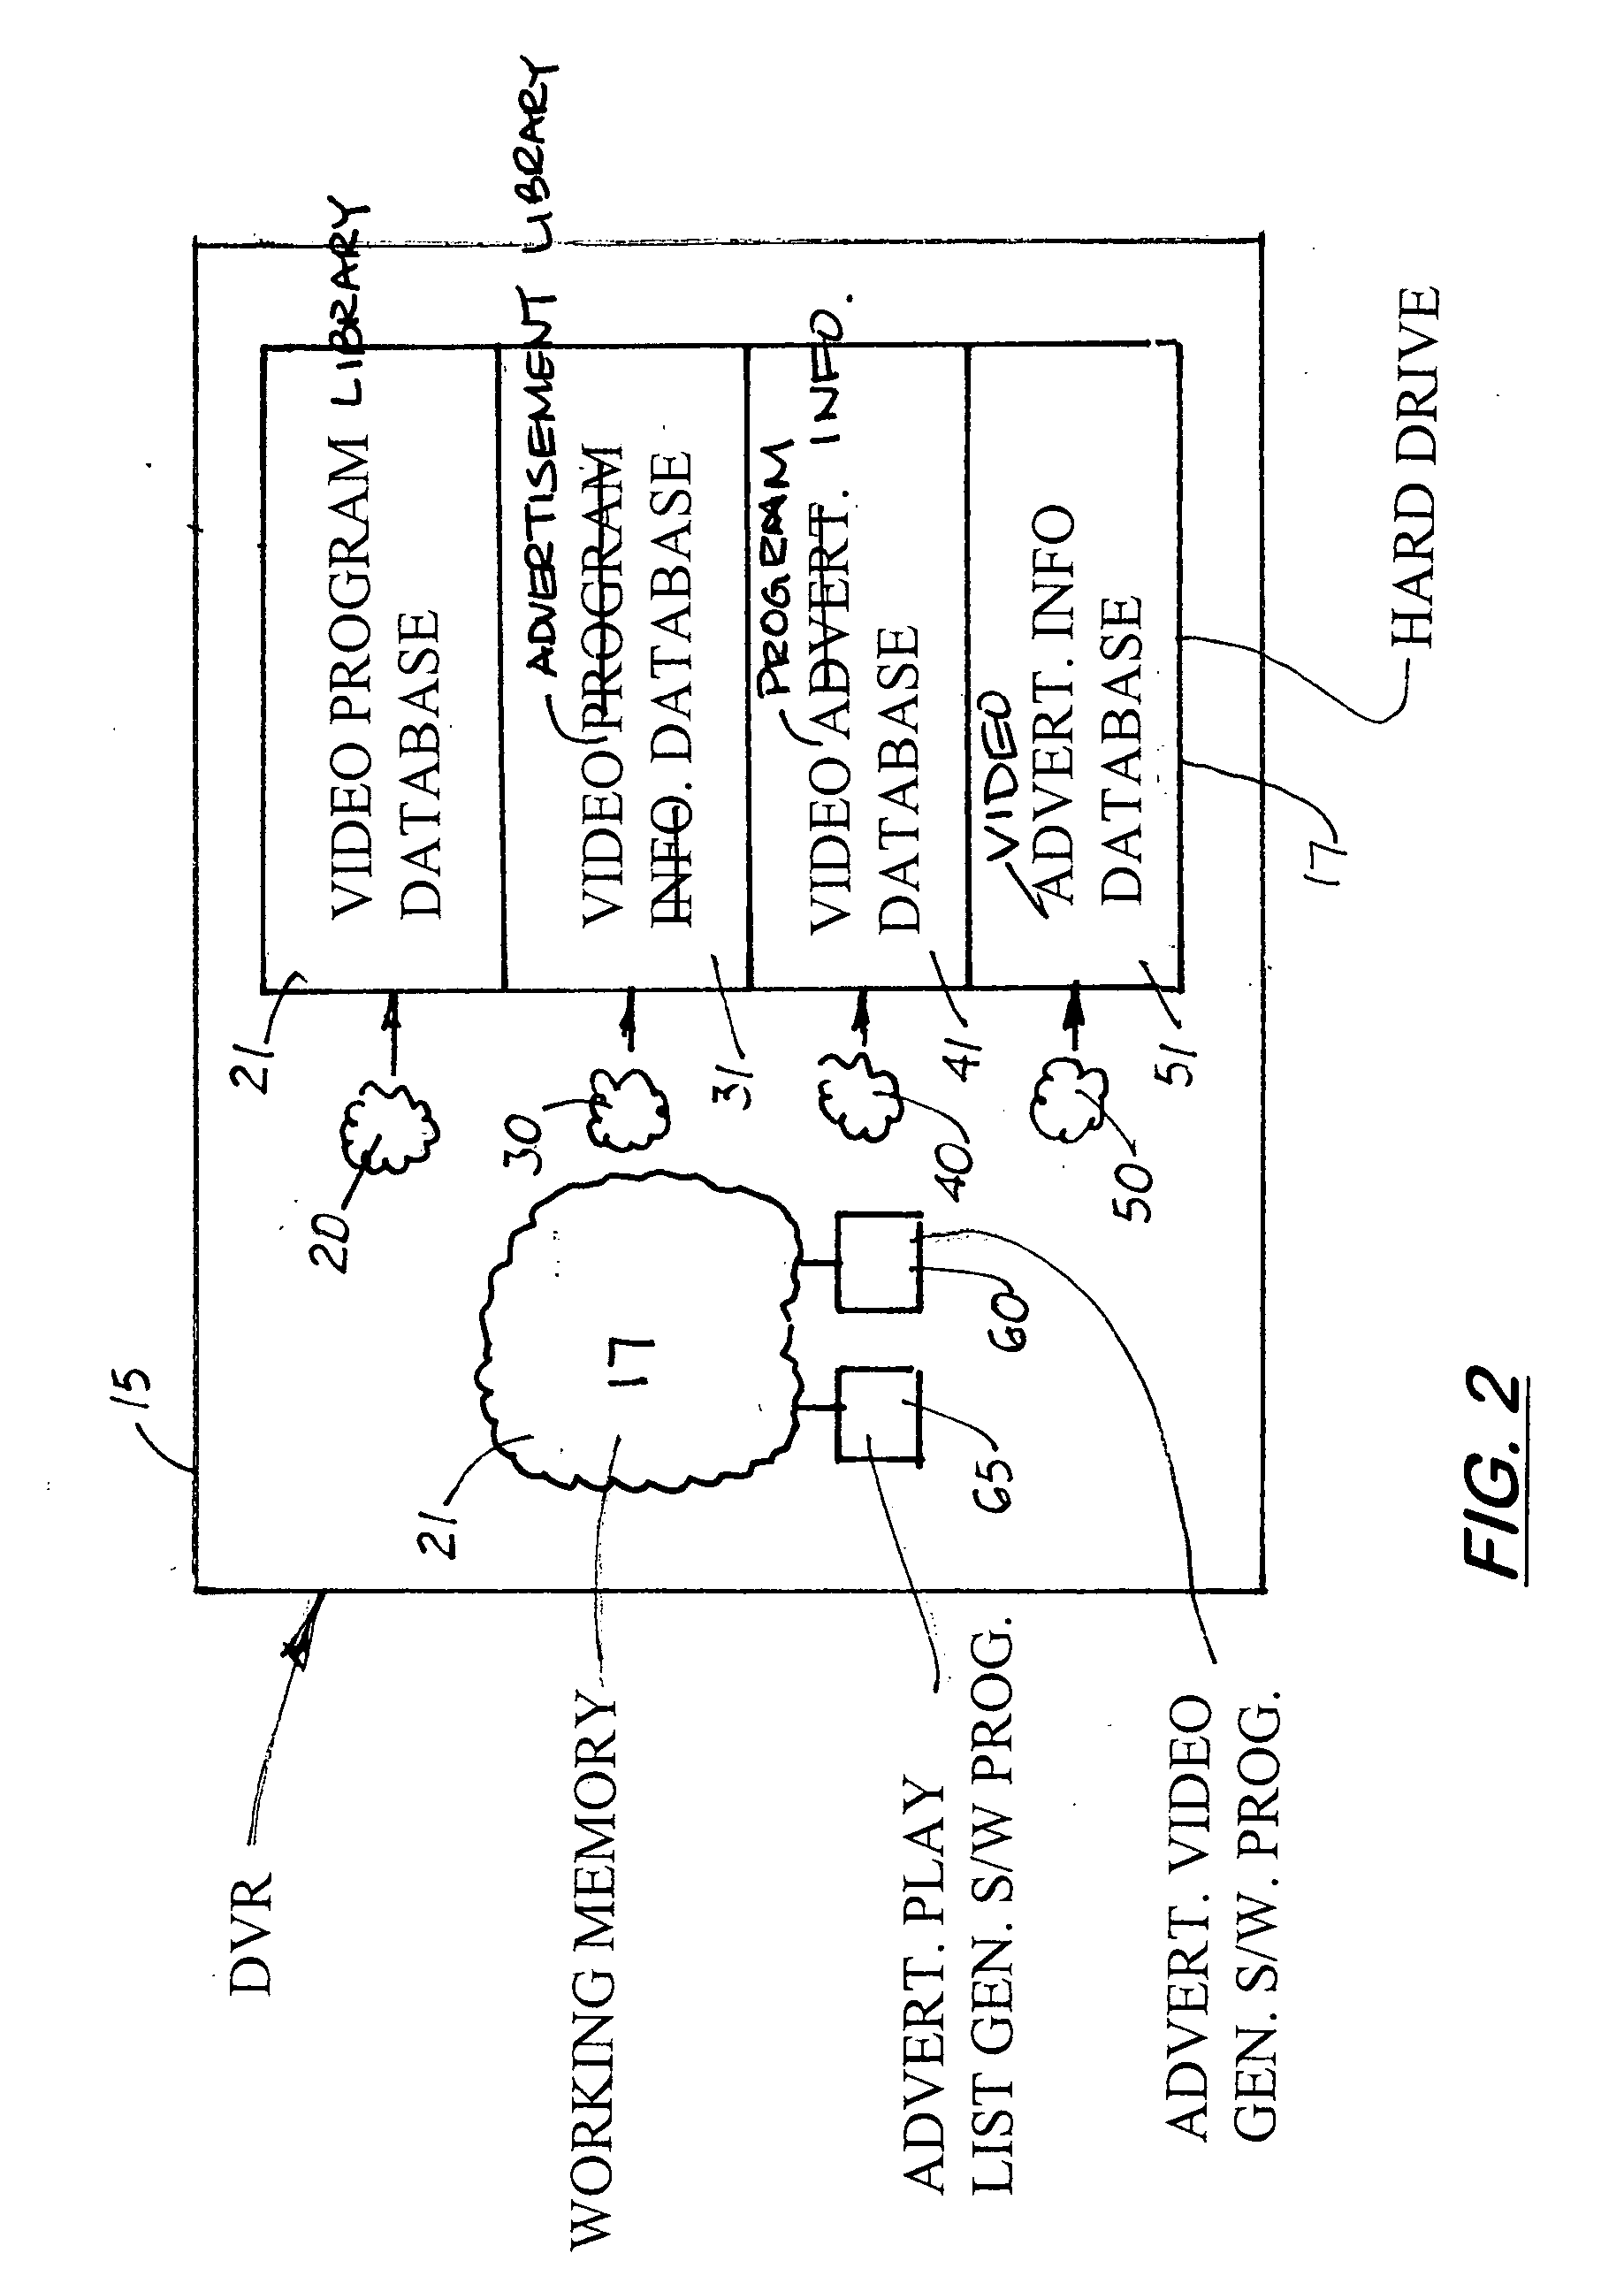 System and method for targeting video advertisements